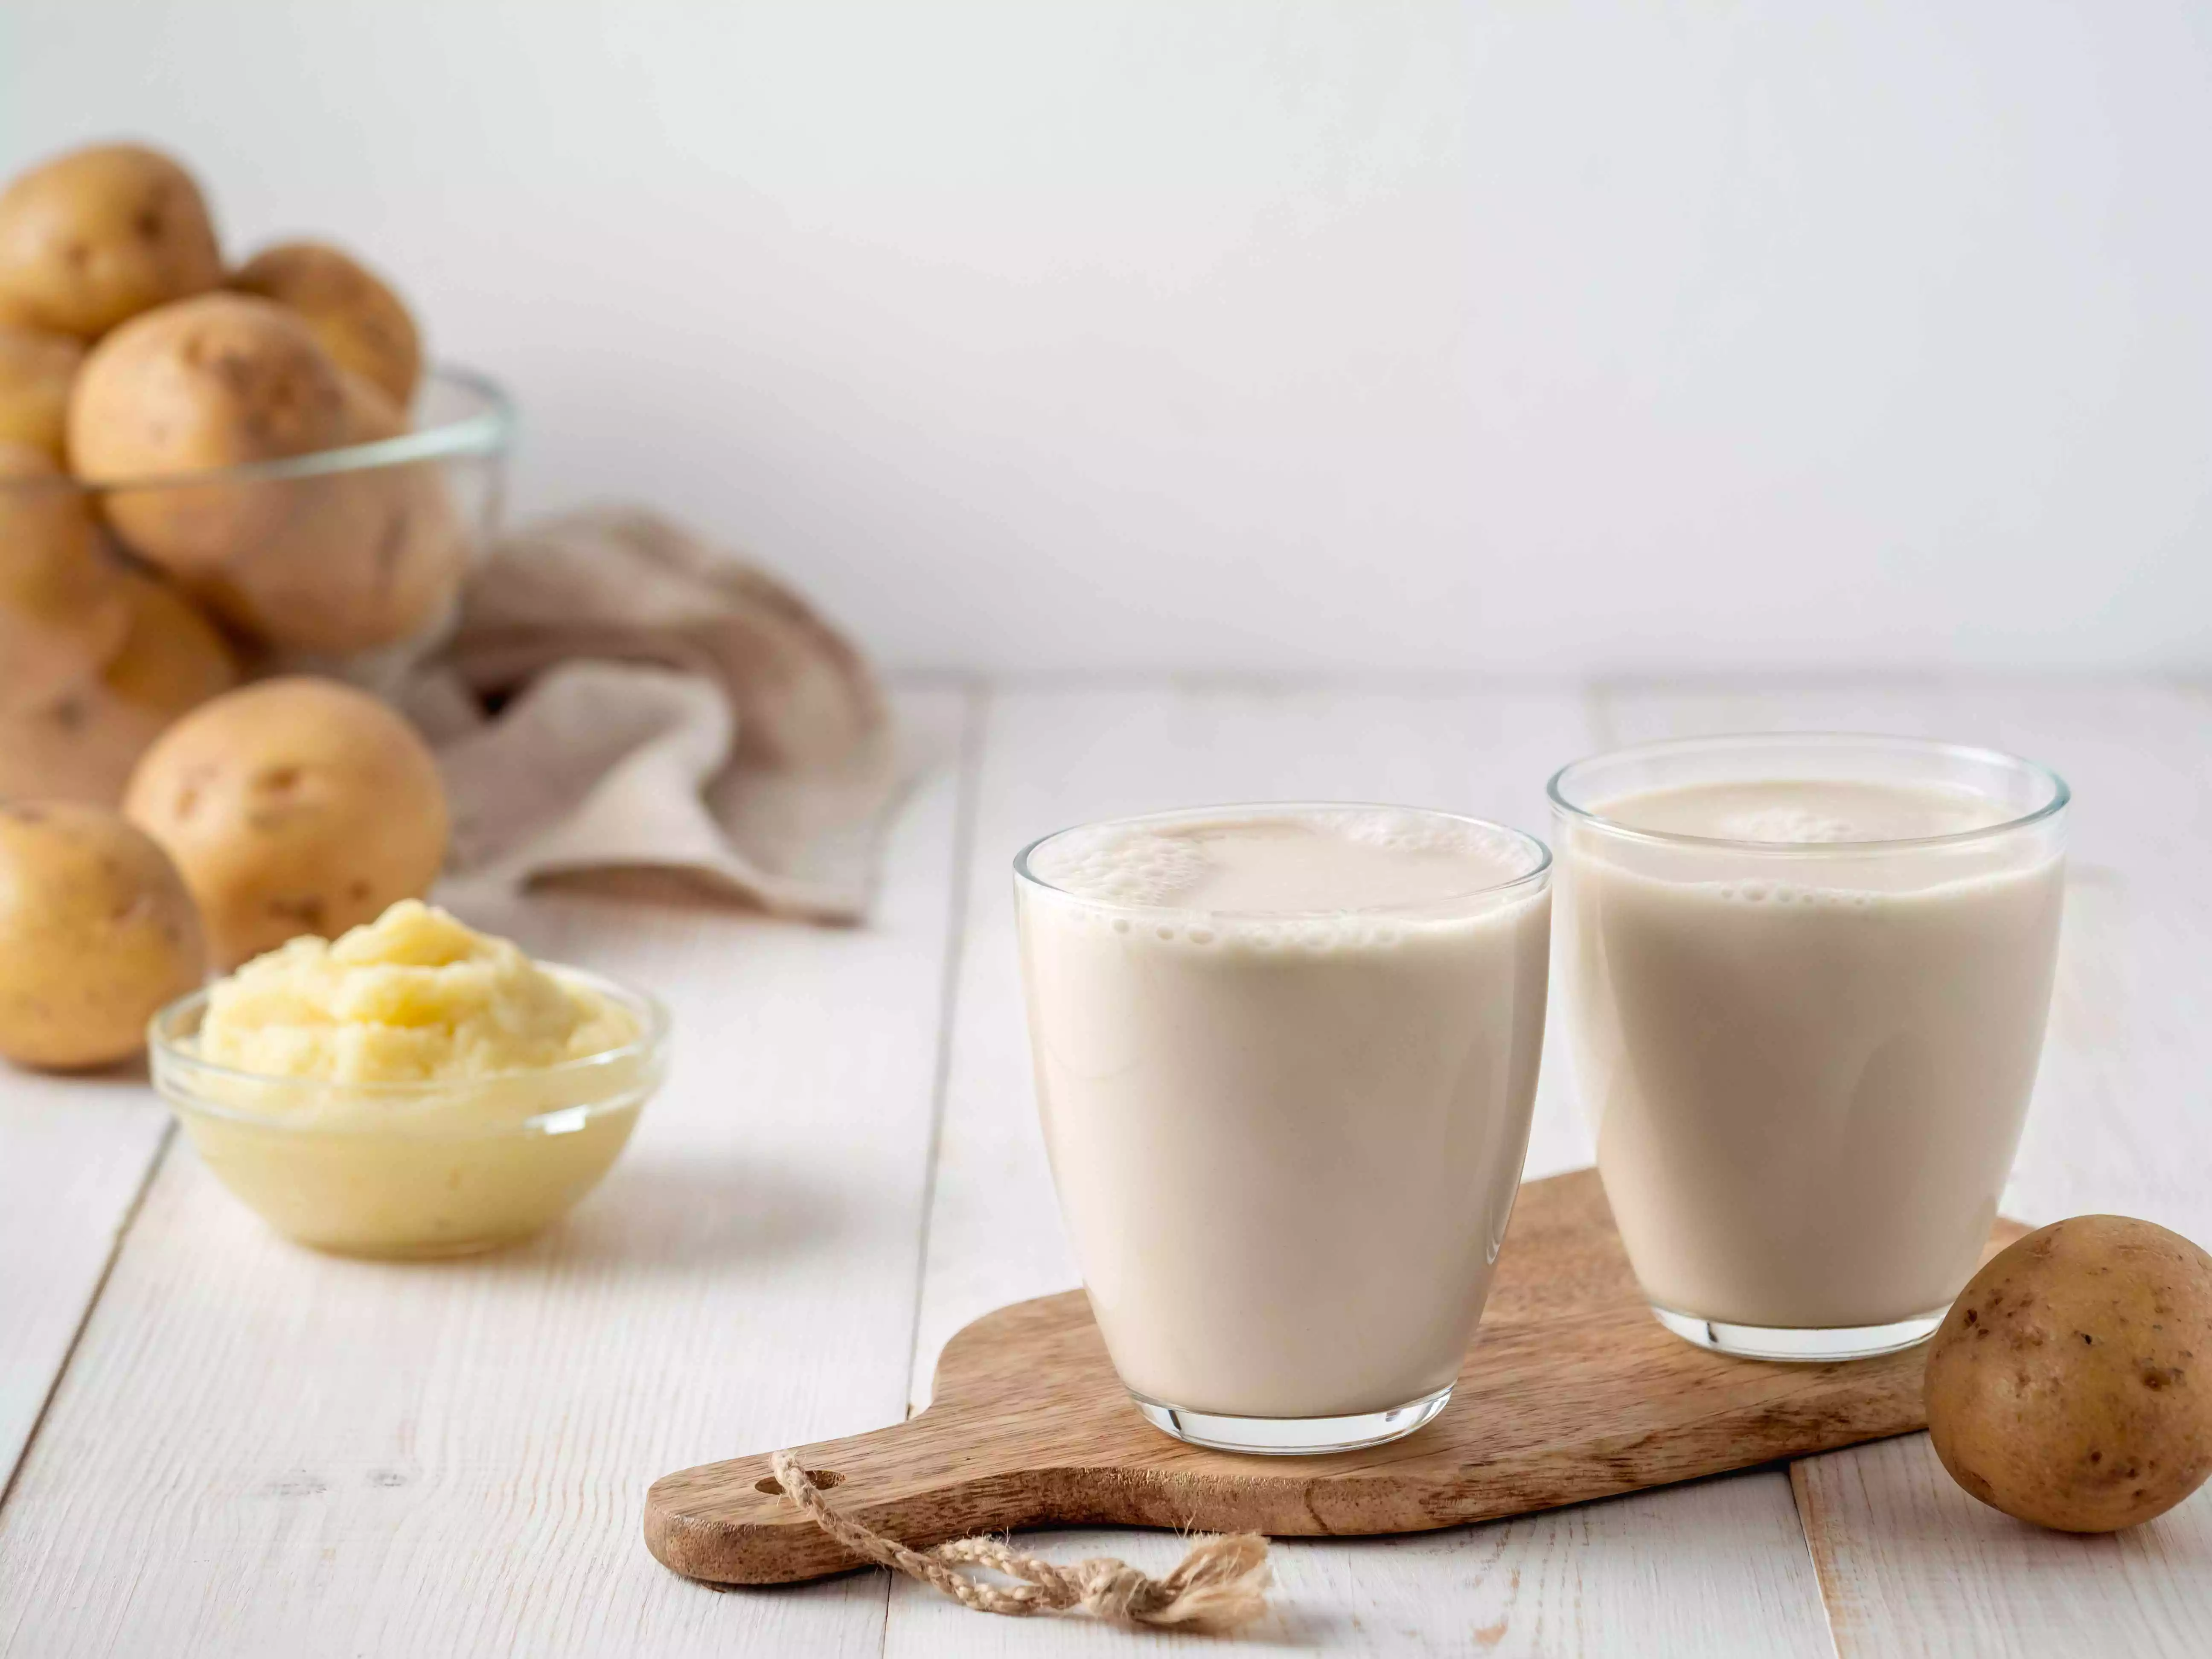 Plant based milk is big in the 2023 food and beverage trend